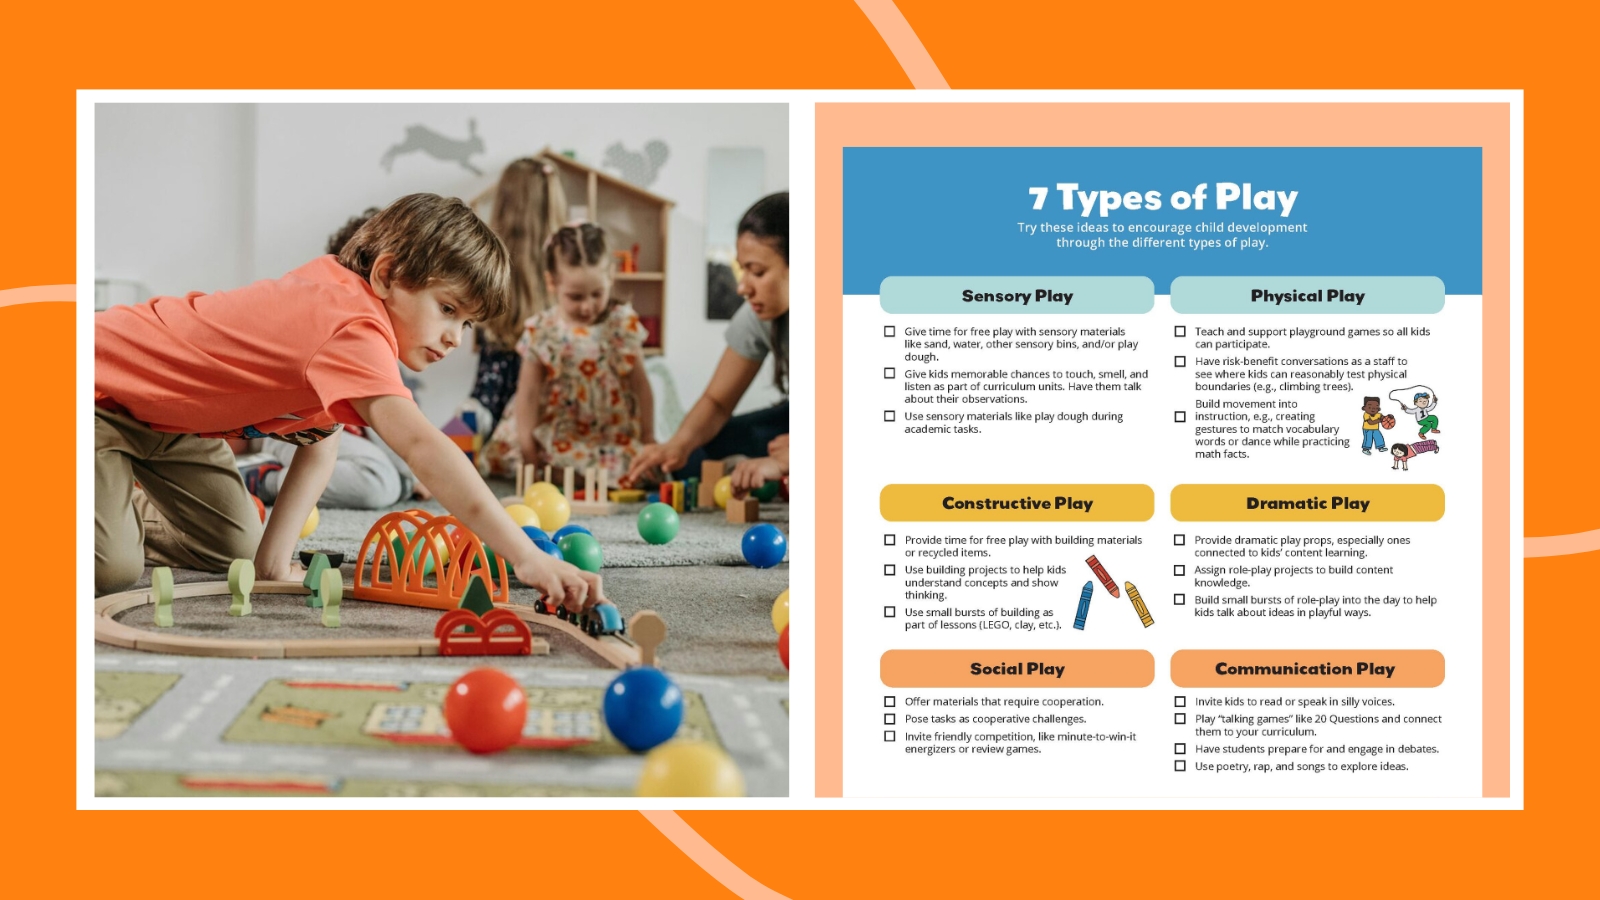 7 Types of Play Important for Promoting Child Development [Video]